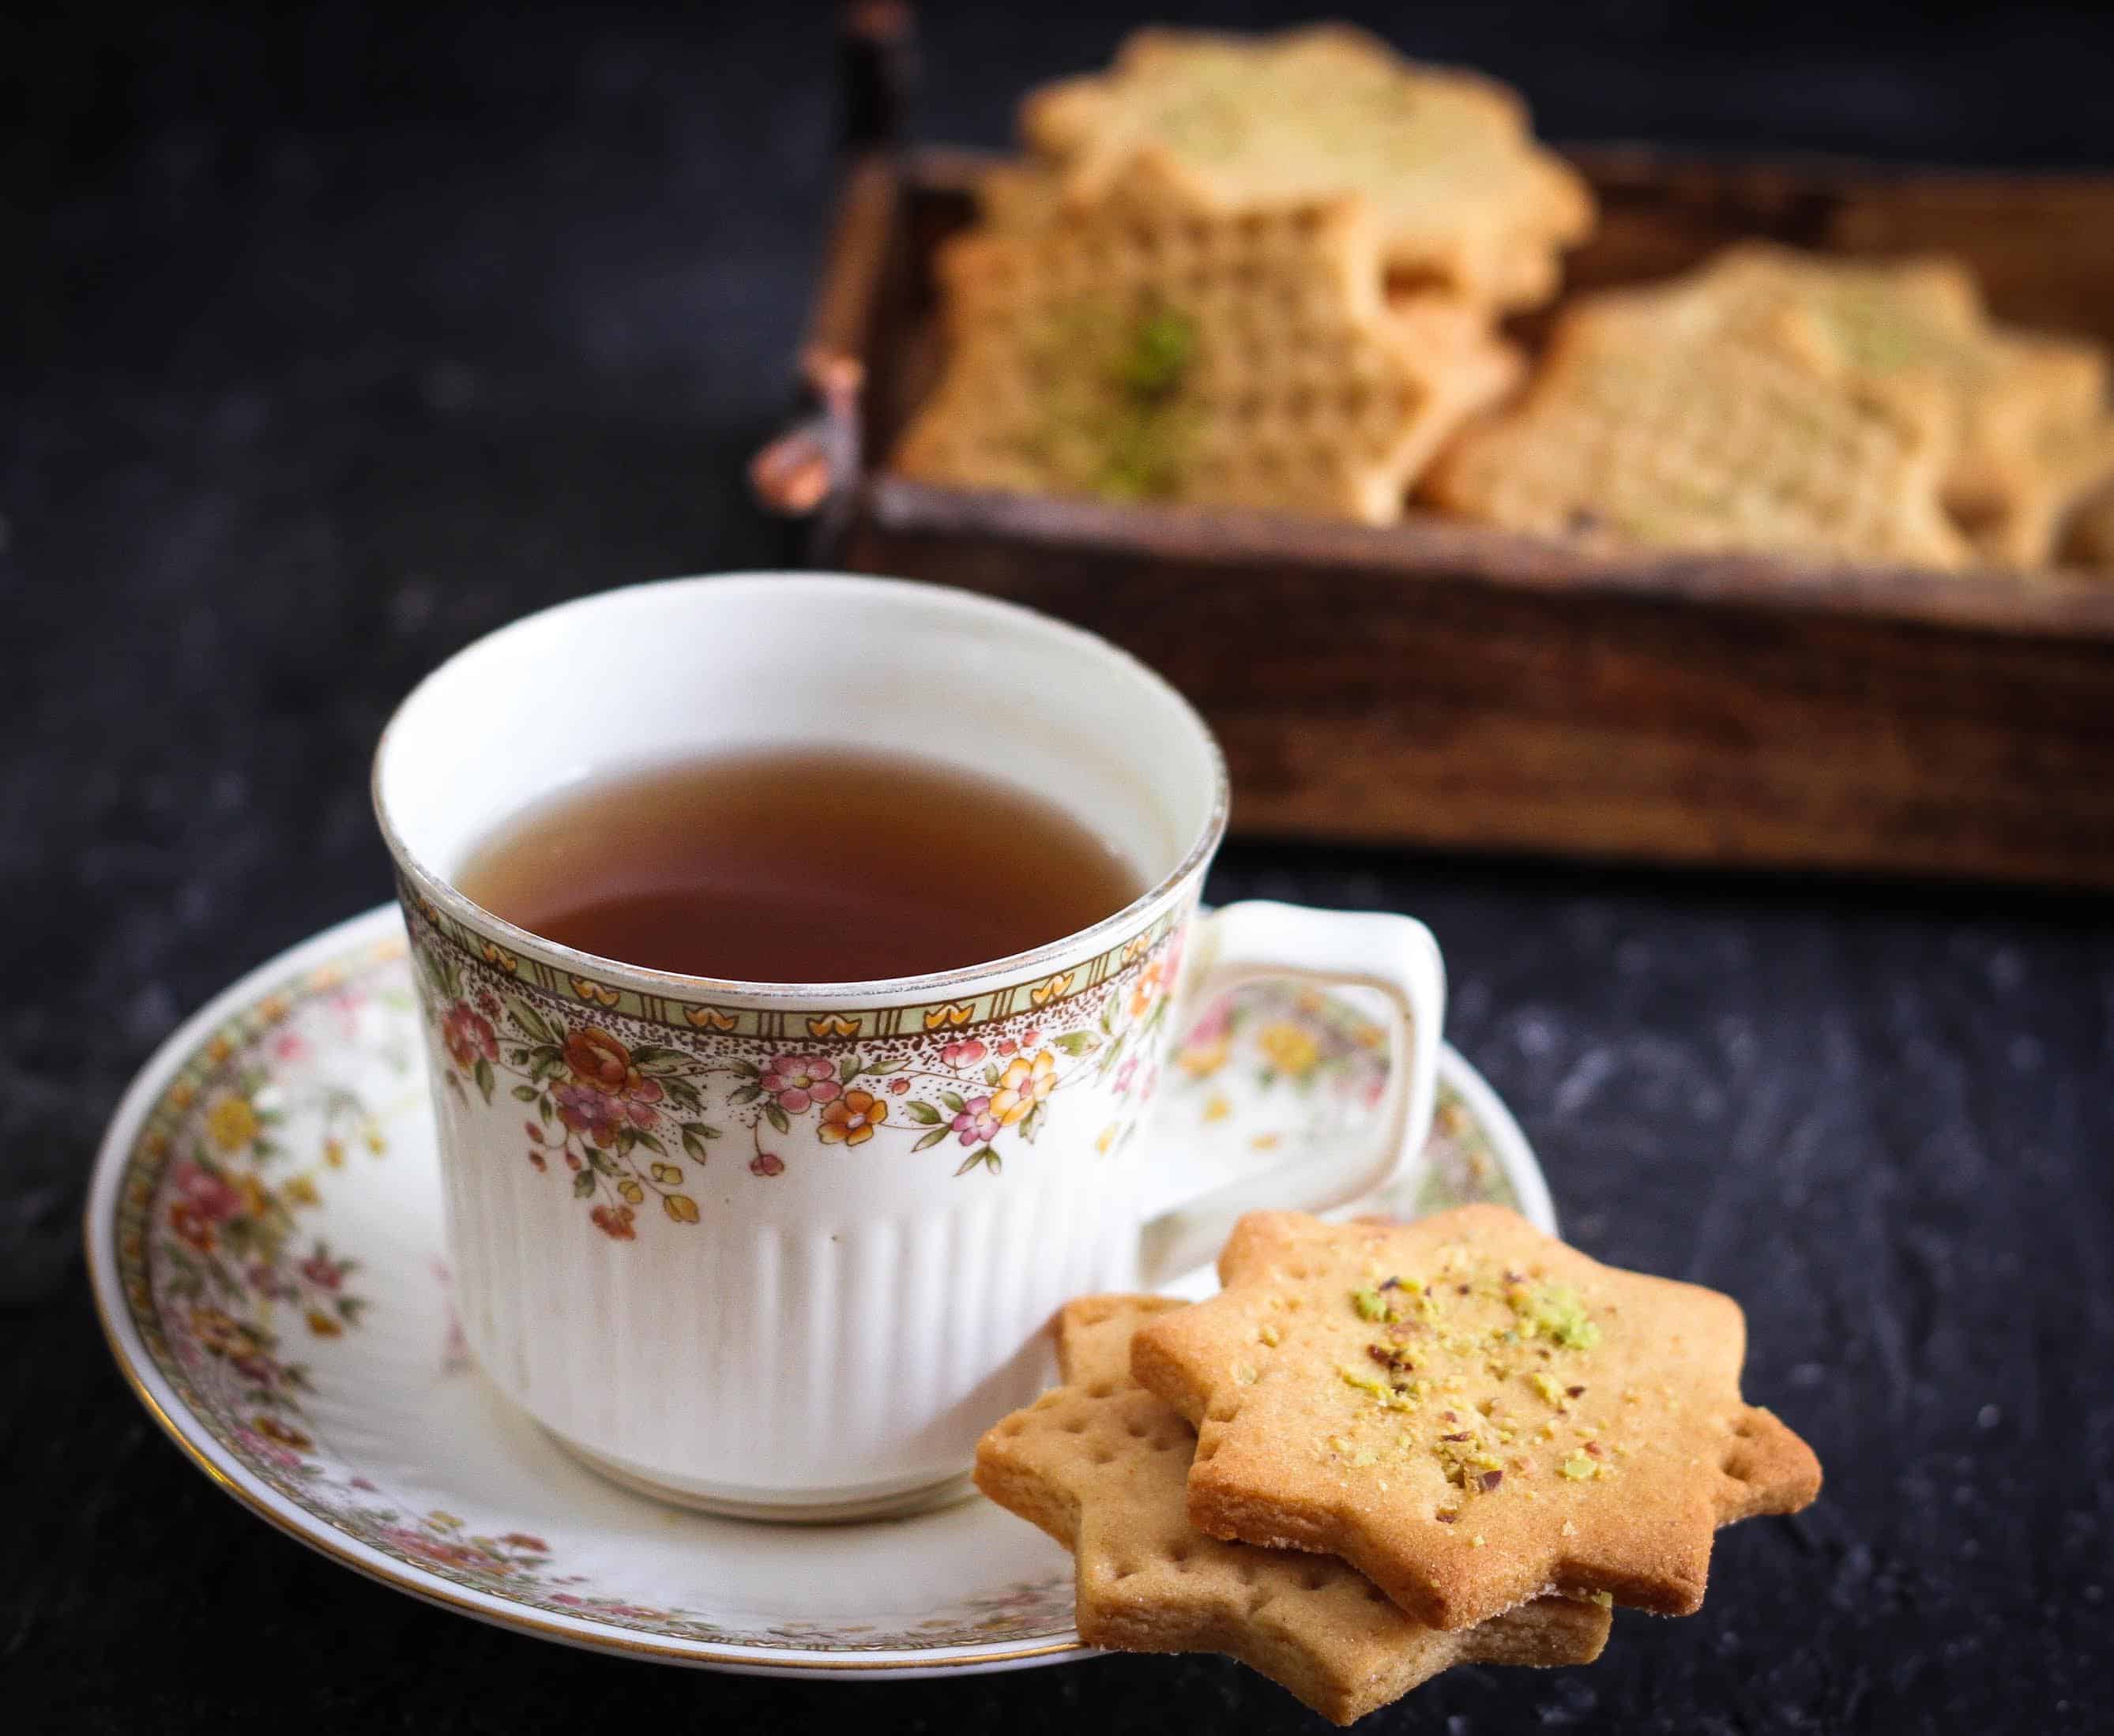 Atta Biscuits or Eggless Wholewheat Cookies vegetarian tea time snacks